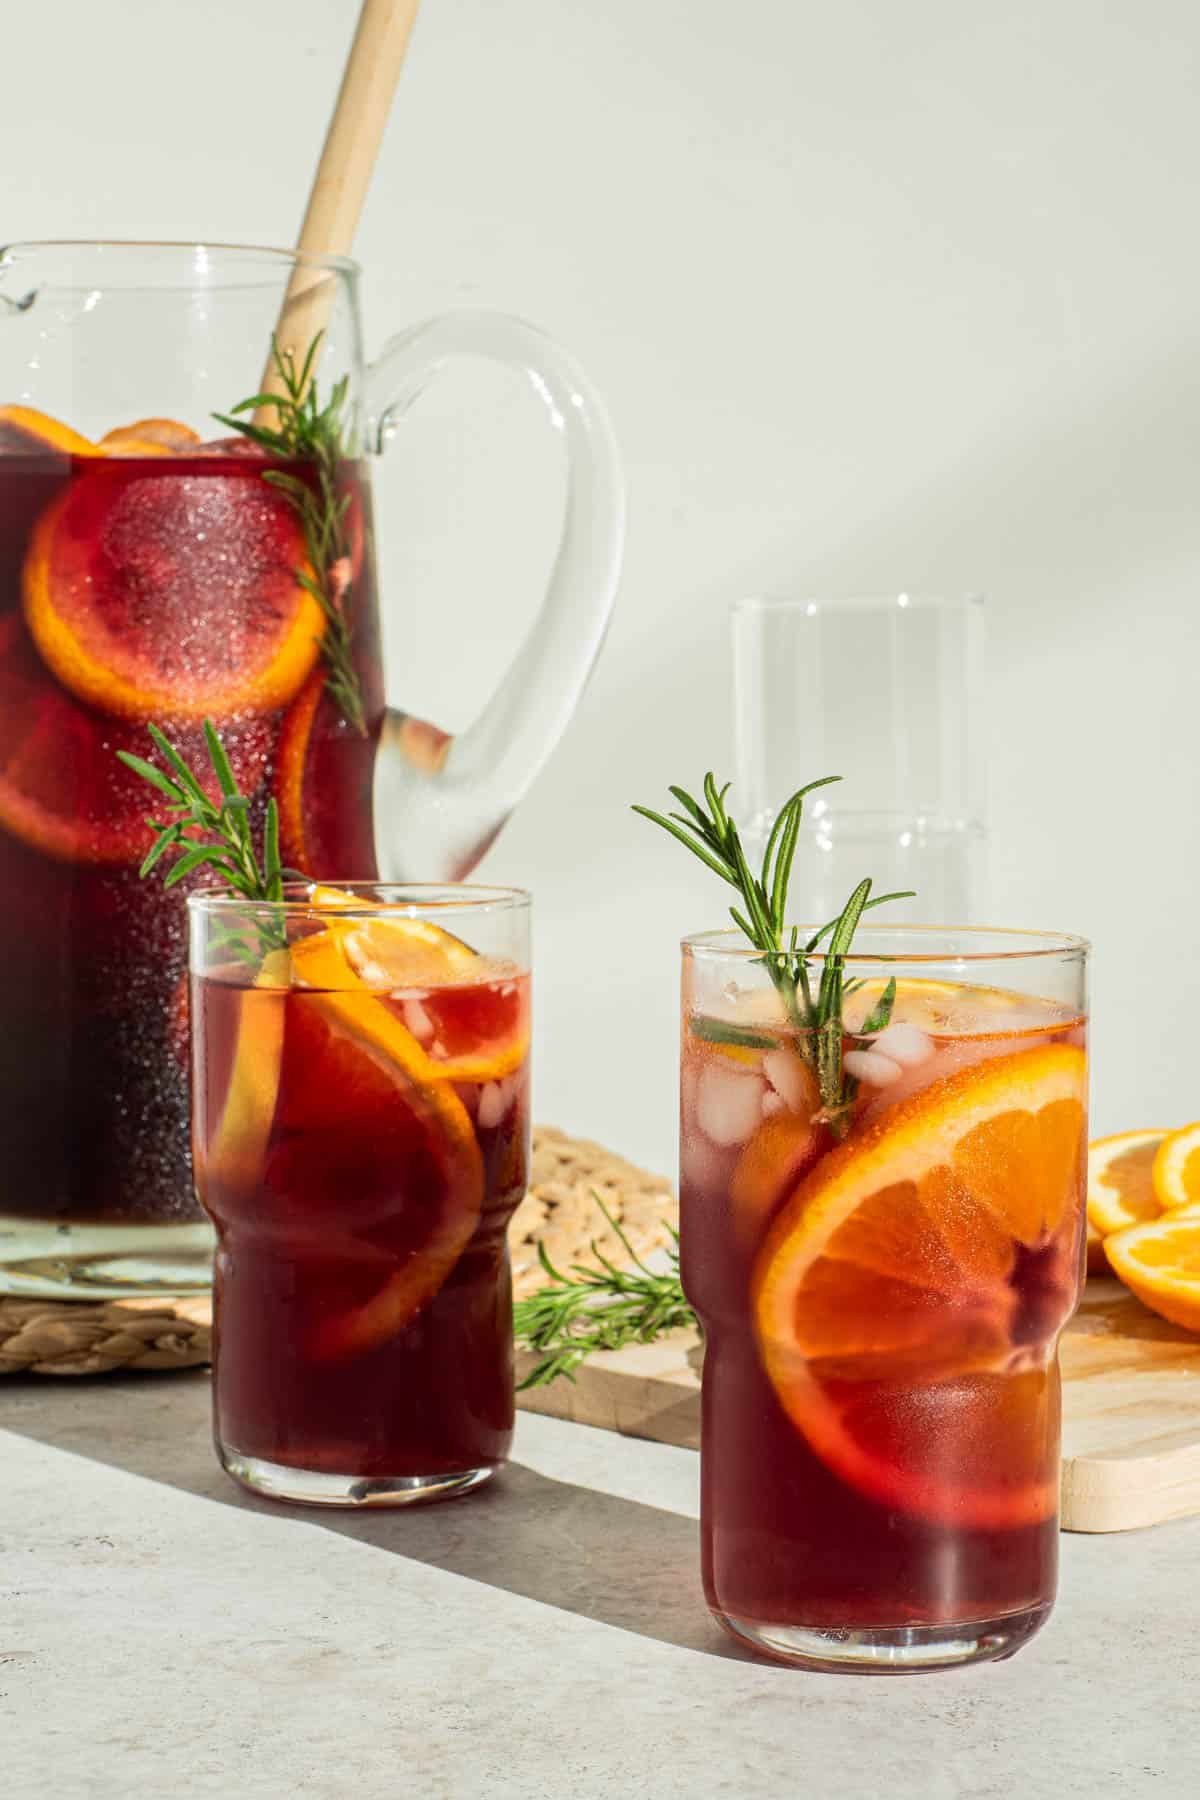 two glasses of holiday sangria garnished with orange wheels and sprigs of rosemary in front of a pitcher of holiday sangria with a wooden stirring spoon.